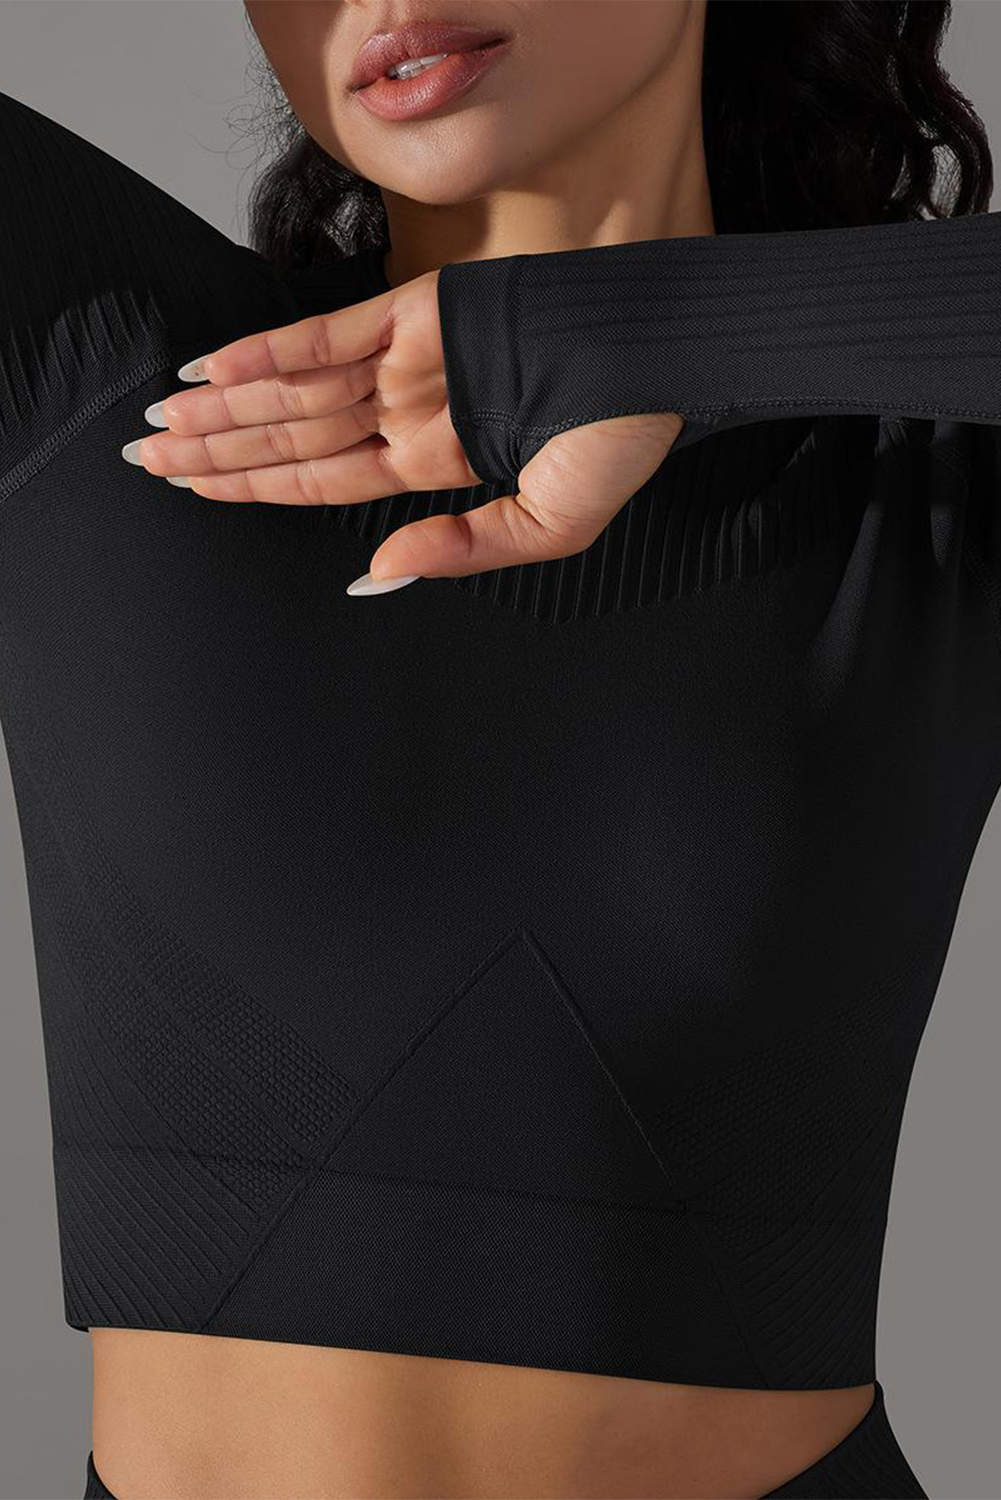 Black Solid Color Thumbholes Long Sleeve Active Crop Top